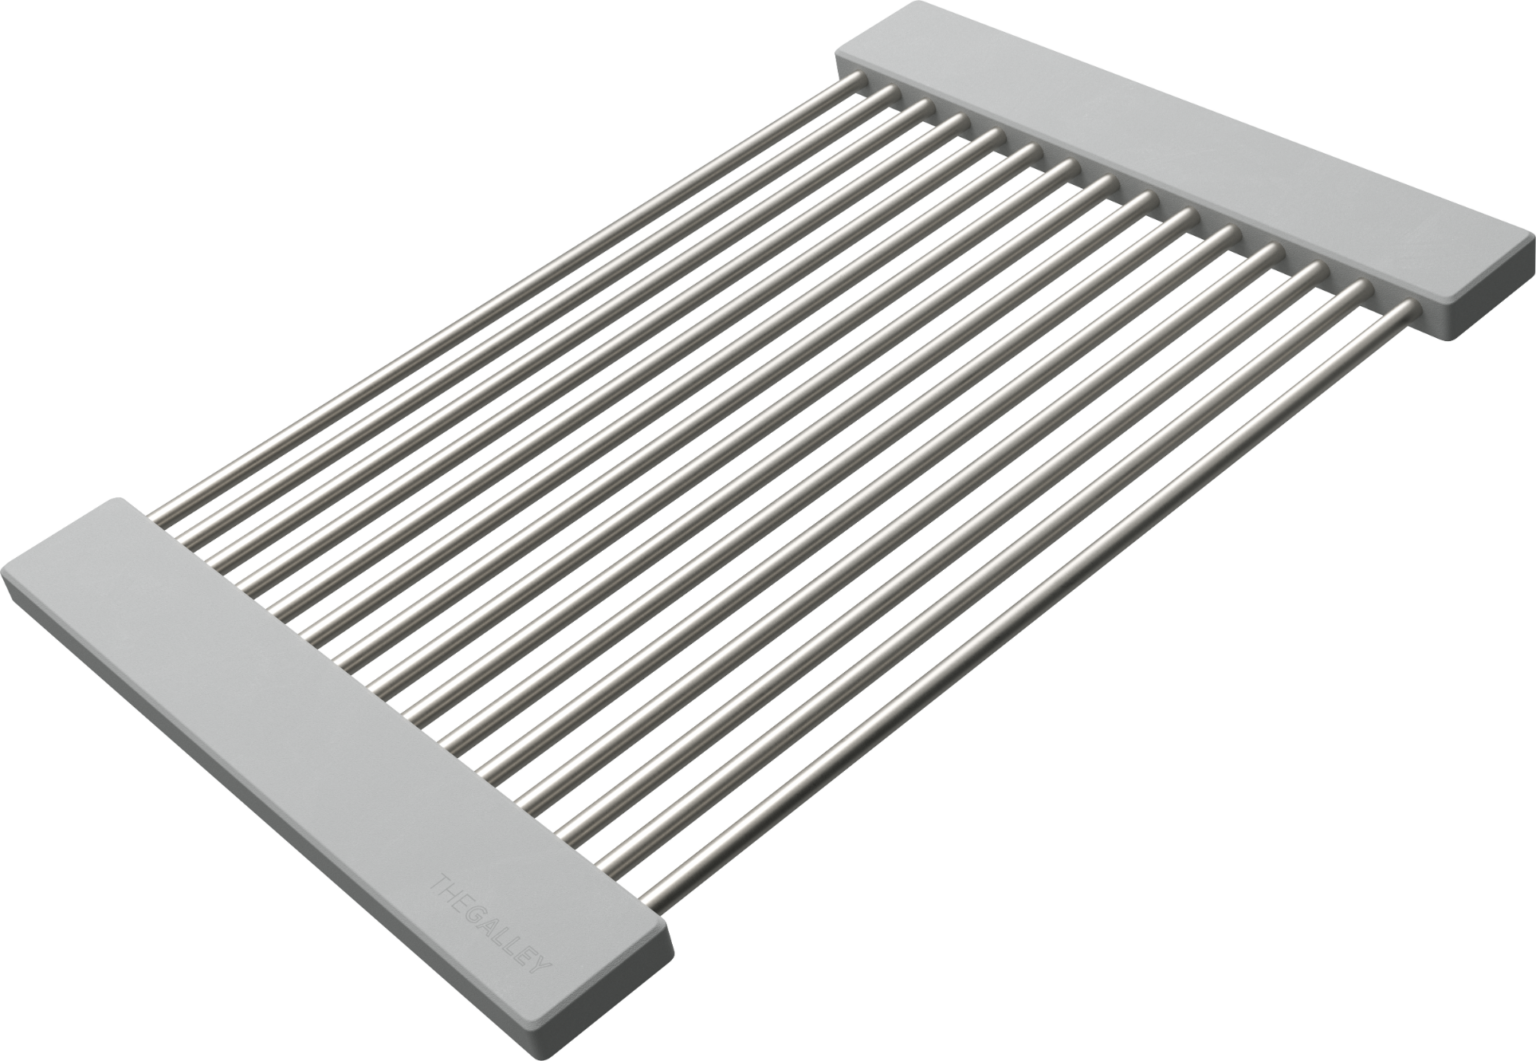 The Galley Lower Tier Drying Rack 12-1/4" x 17"